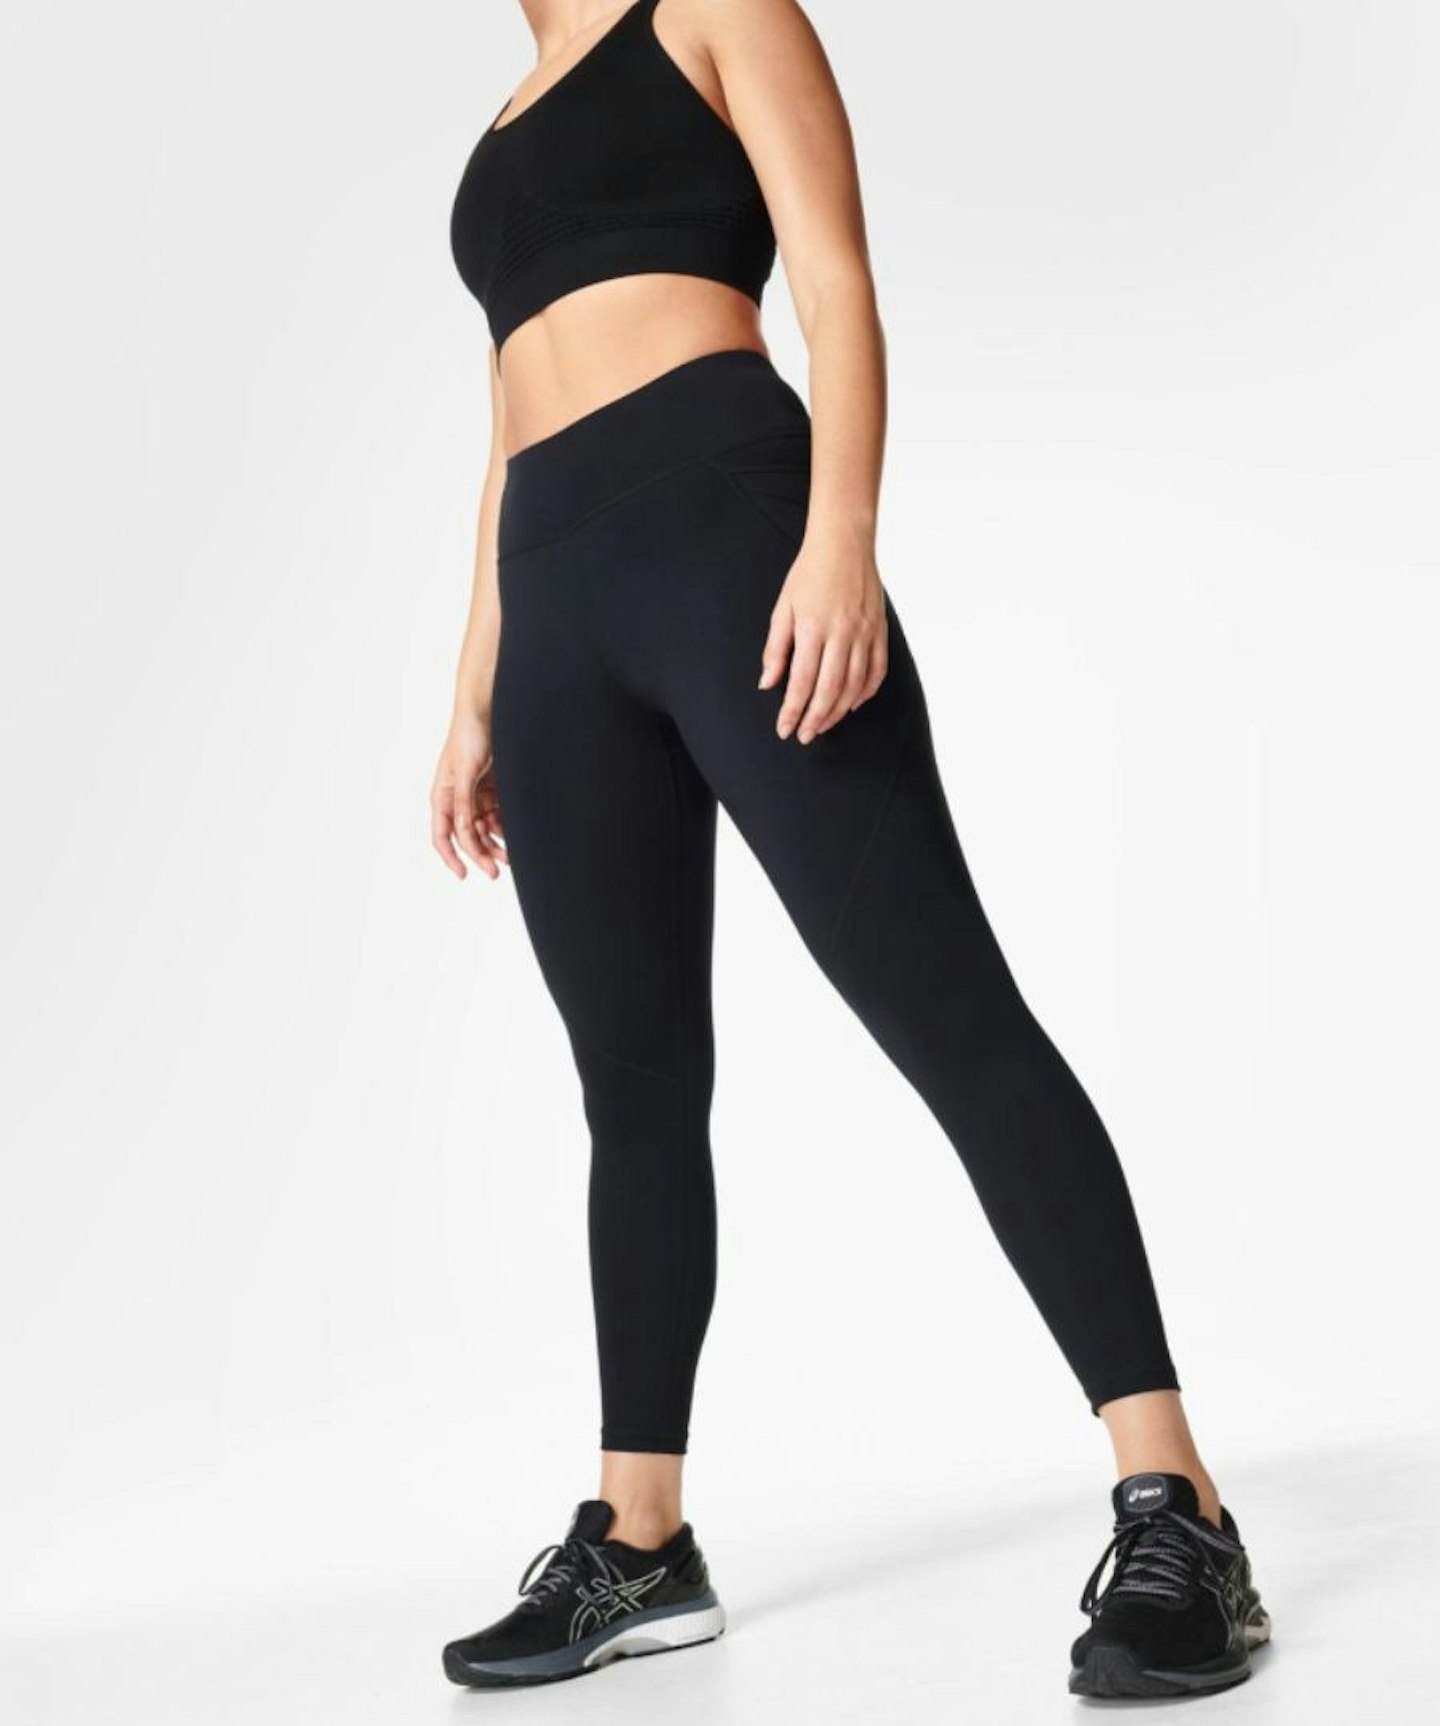 The Best Workout Leggings Of 2023 Are Good For Squats & Gym Selfies